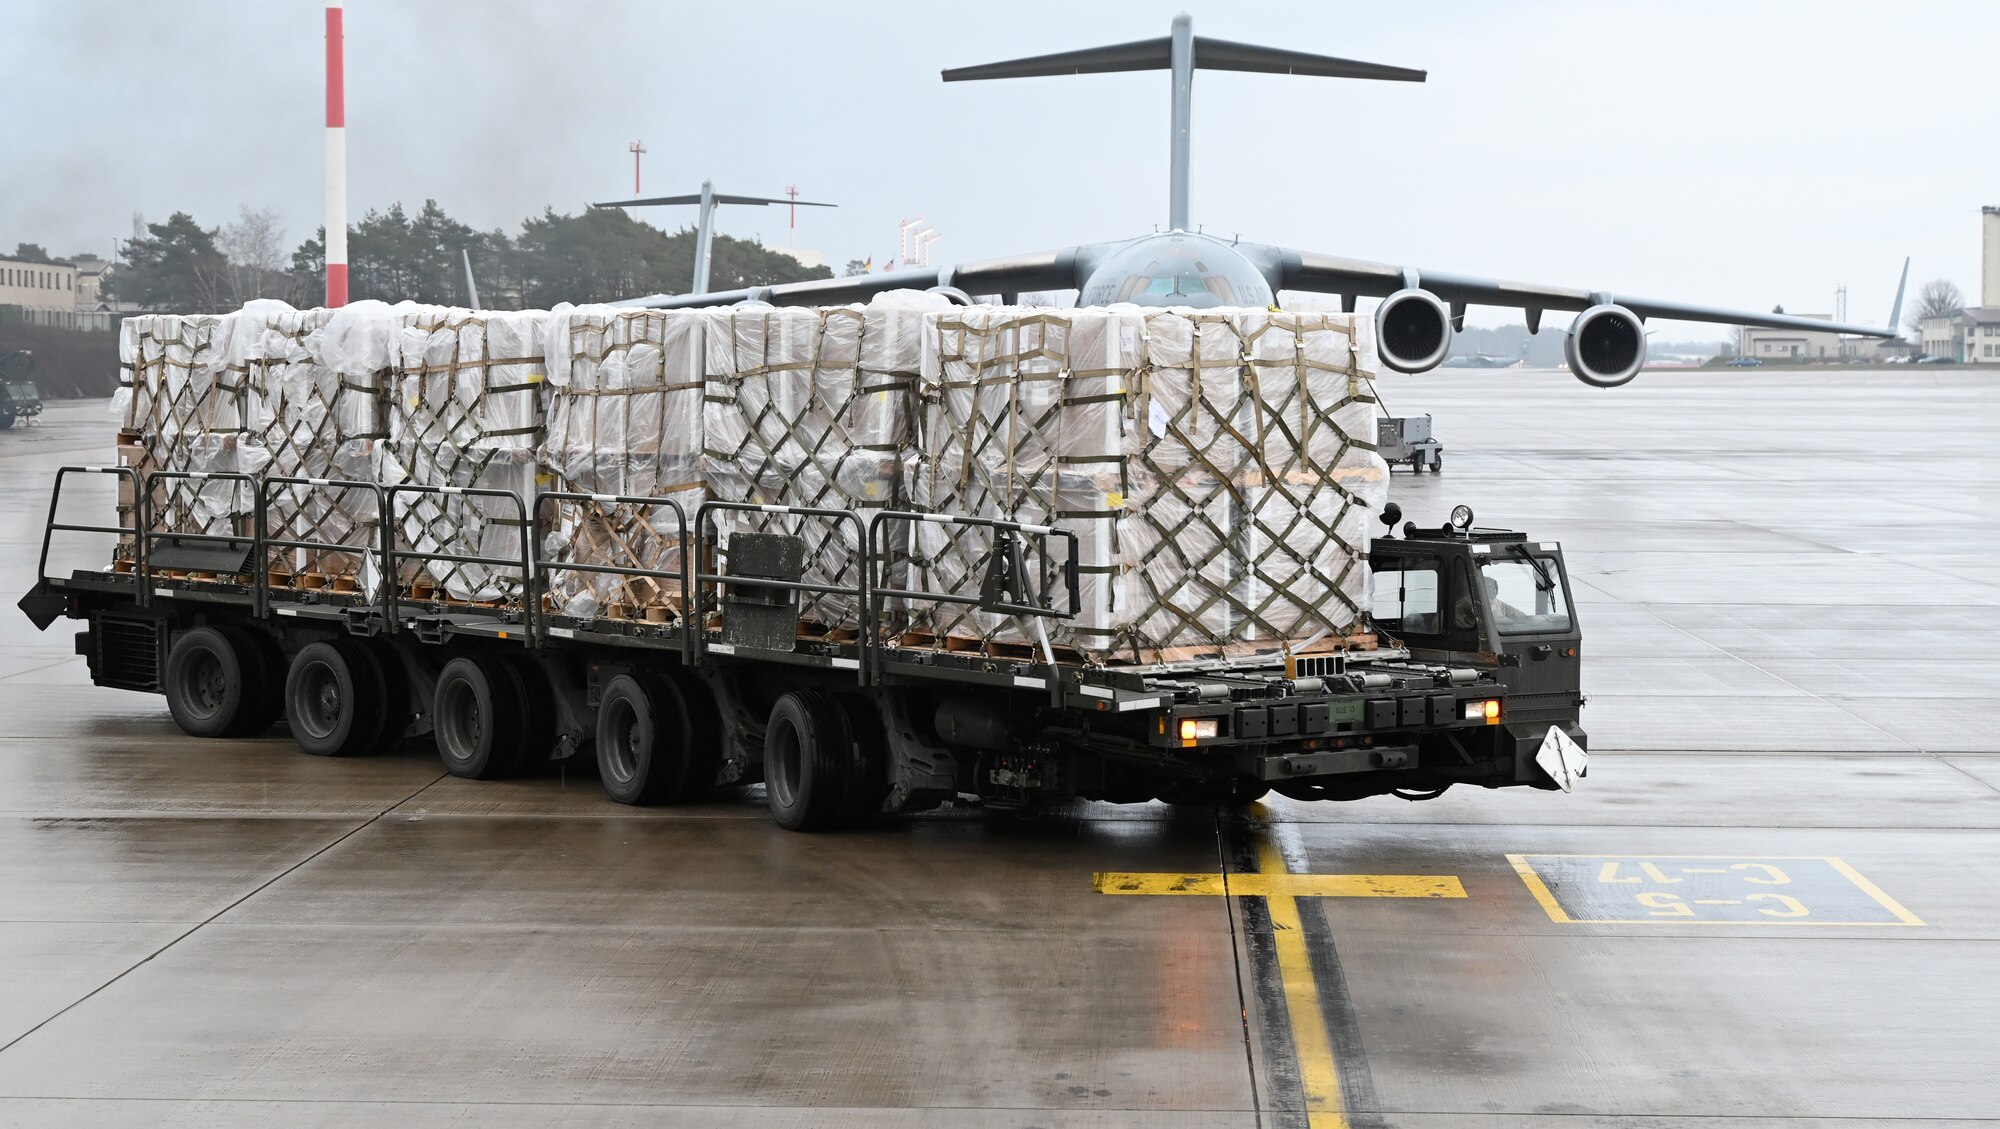 A Tunner aircraft loader transports bundles of masks at Ramstein Air Base, Germany, Feb. 2, 2021. The 721st Aerial Port Squadron Airmen unloaded approximately 15 tons of  masks for U.S. service members across Germany. The squadron plays an important role in the distribution of masks and other COVID-19 protective equipment to help fight COVID-19.. (U.S. Air Force photo by Senior Airman Thomas Karol)